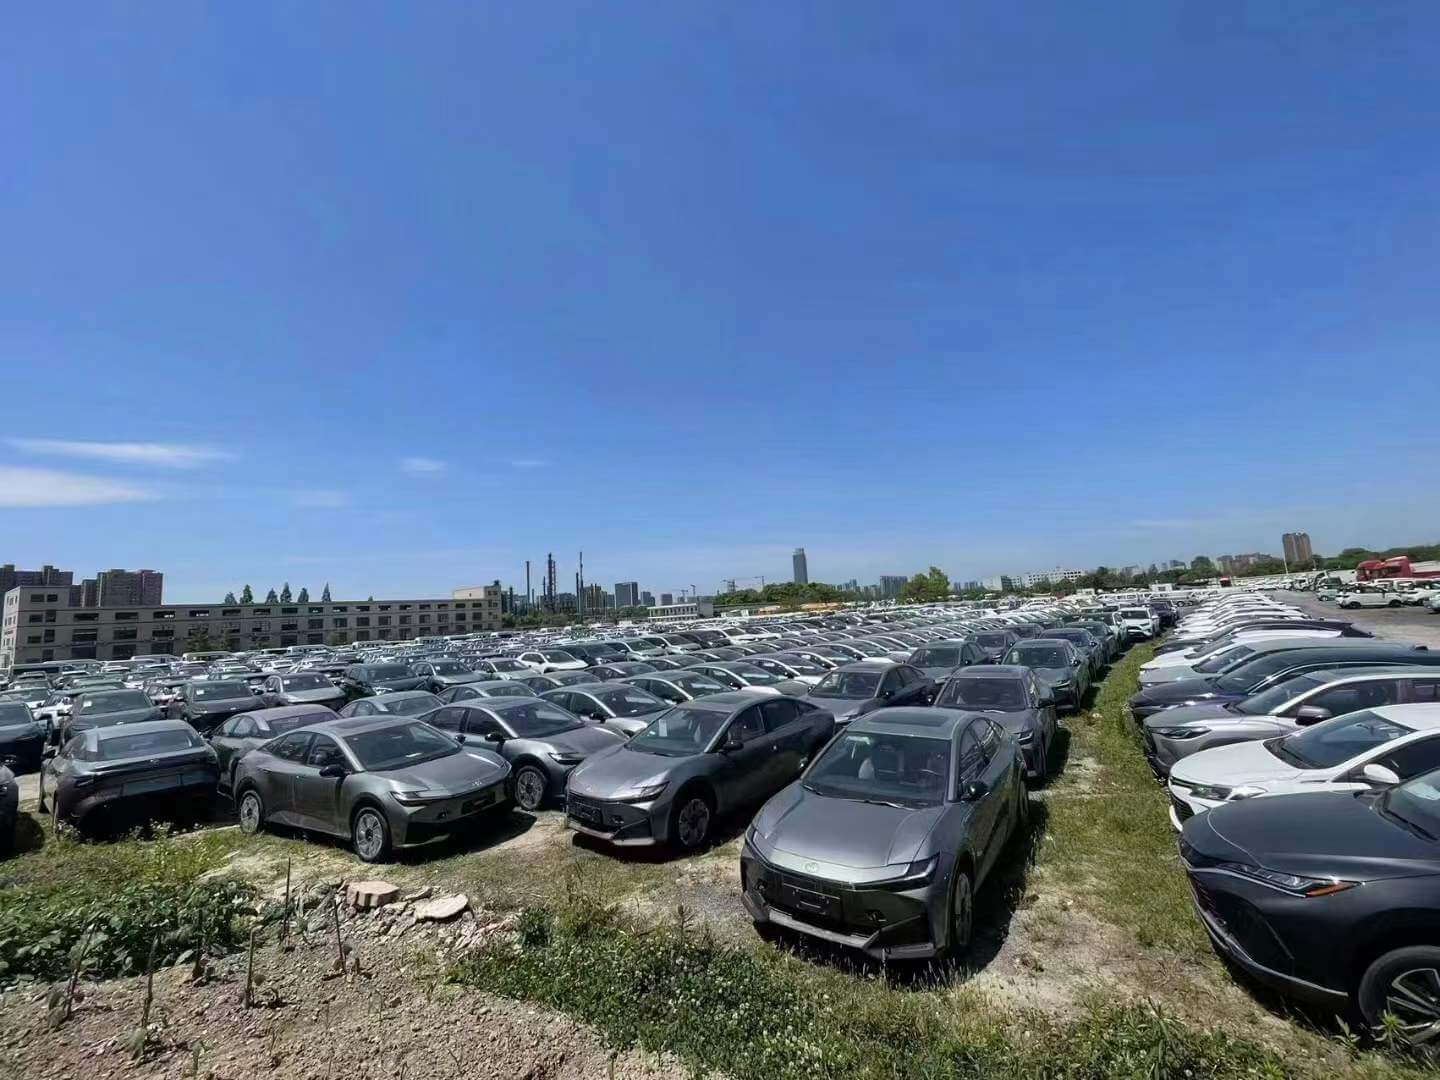 China's Second-Hand Car Export Industry Shows Late-Blooming Advantages